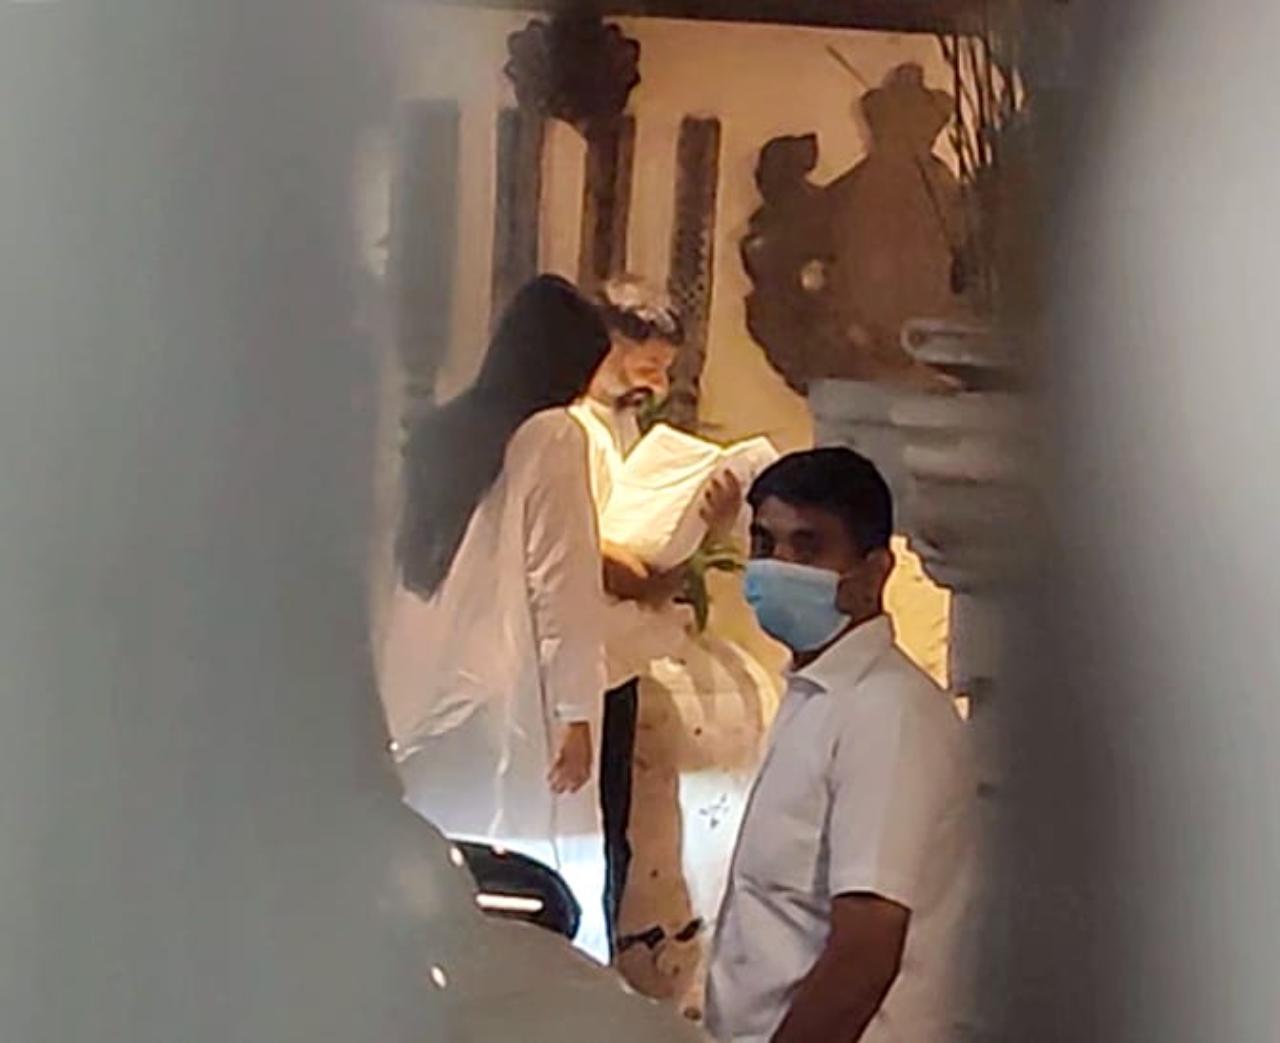 Both Sonam and Anand were snapped by the paparazzi as they entered their Mumbai home. The two were seen twinning in white with the baby in Anand's arms wrapped in a white cloth